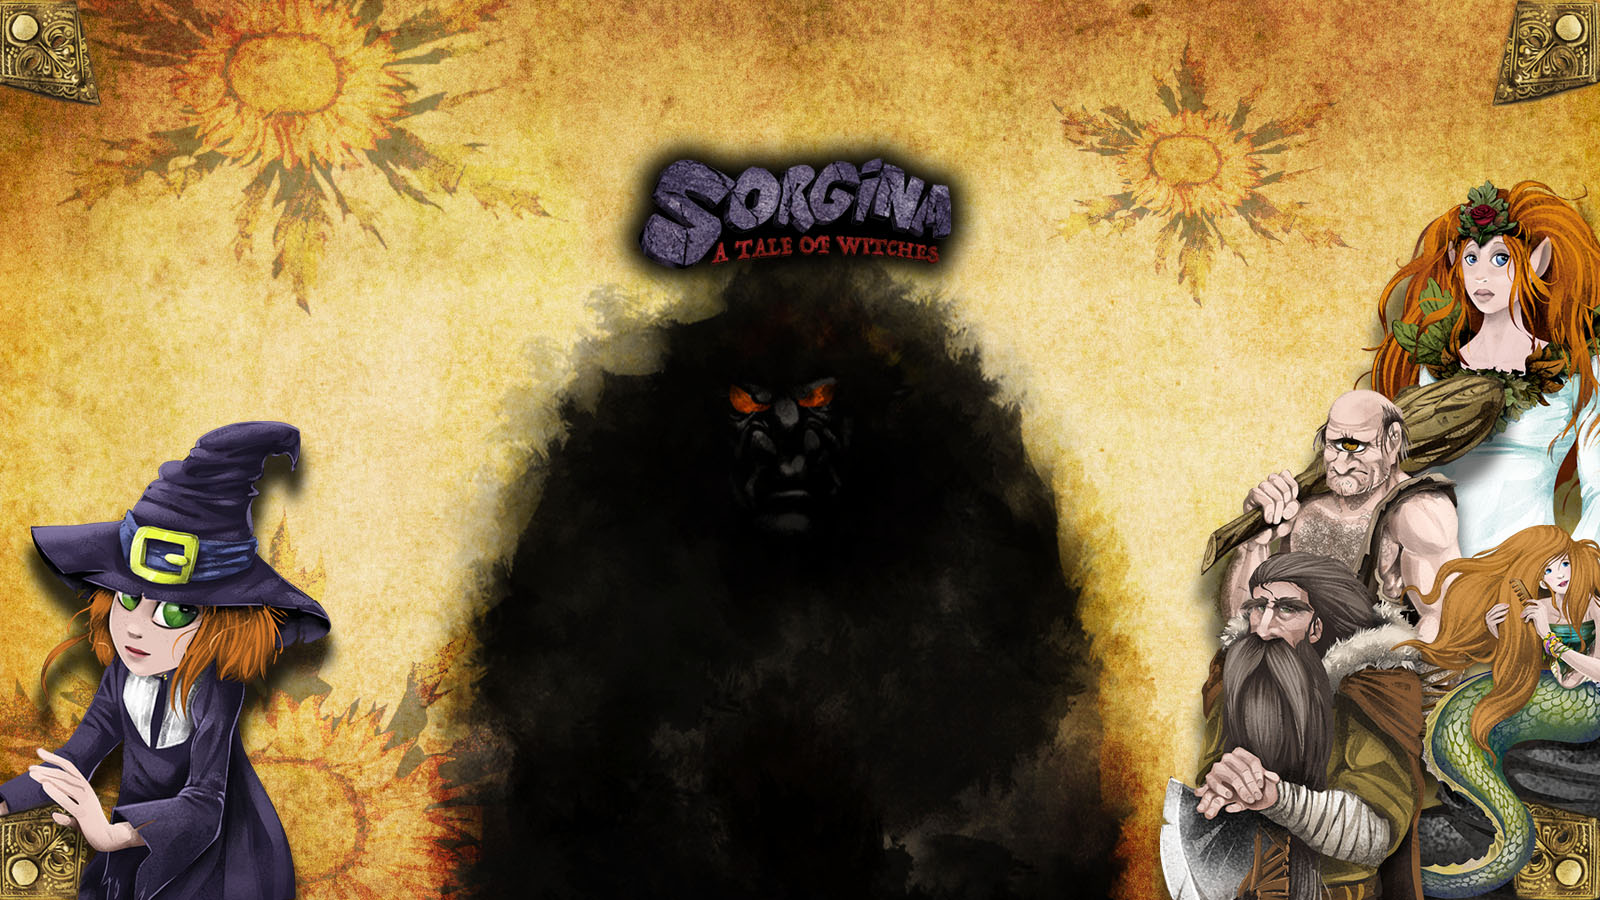 Sorgina: A tale of witches